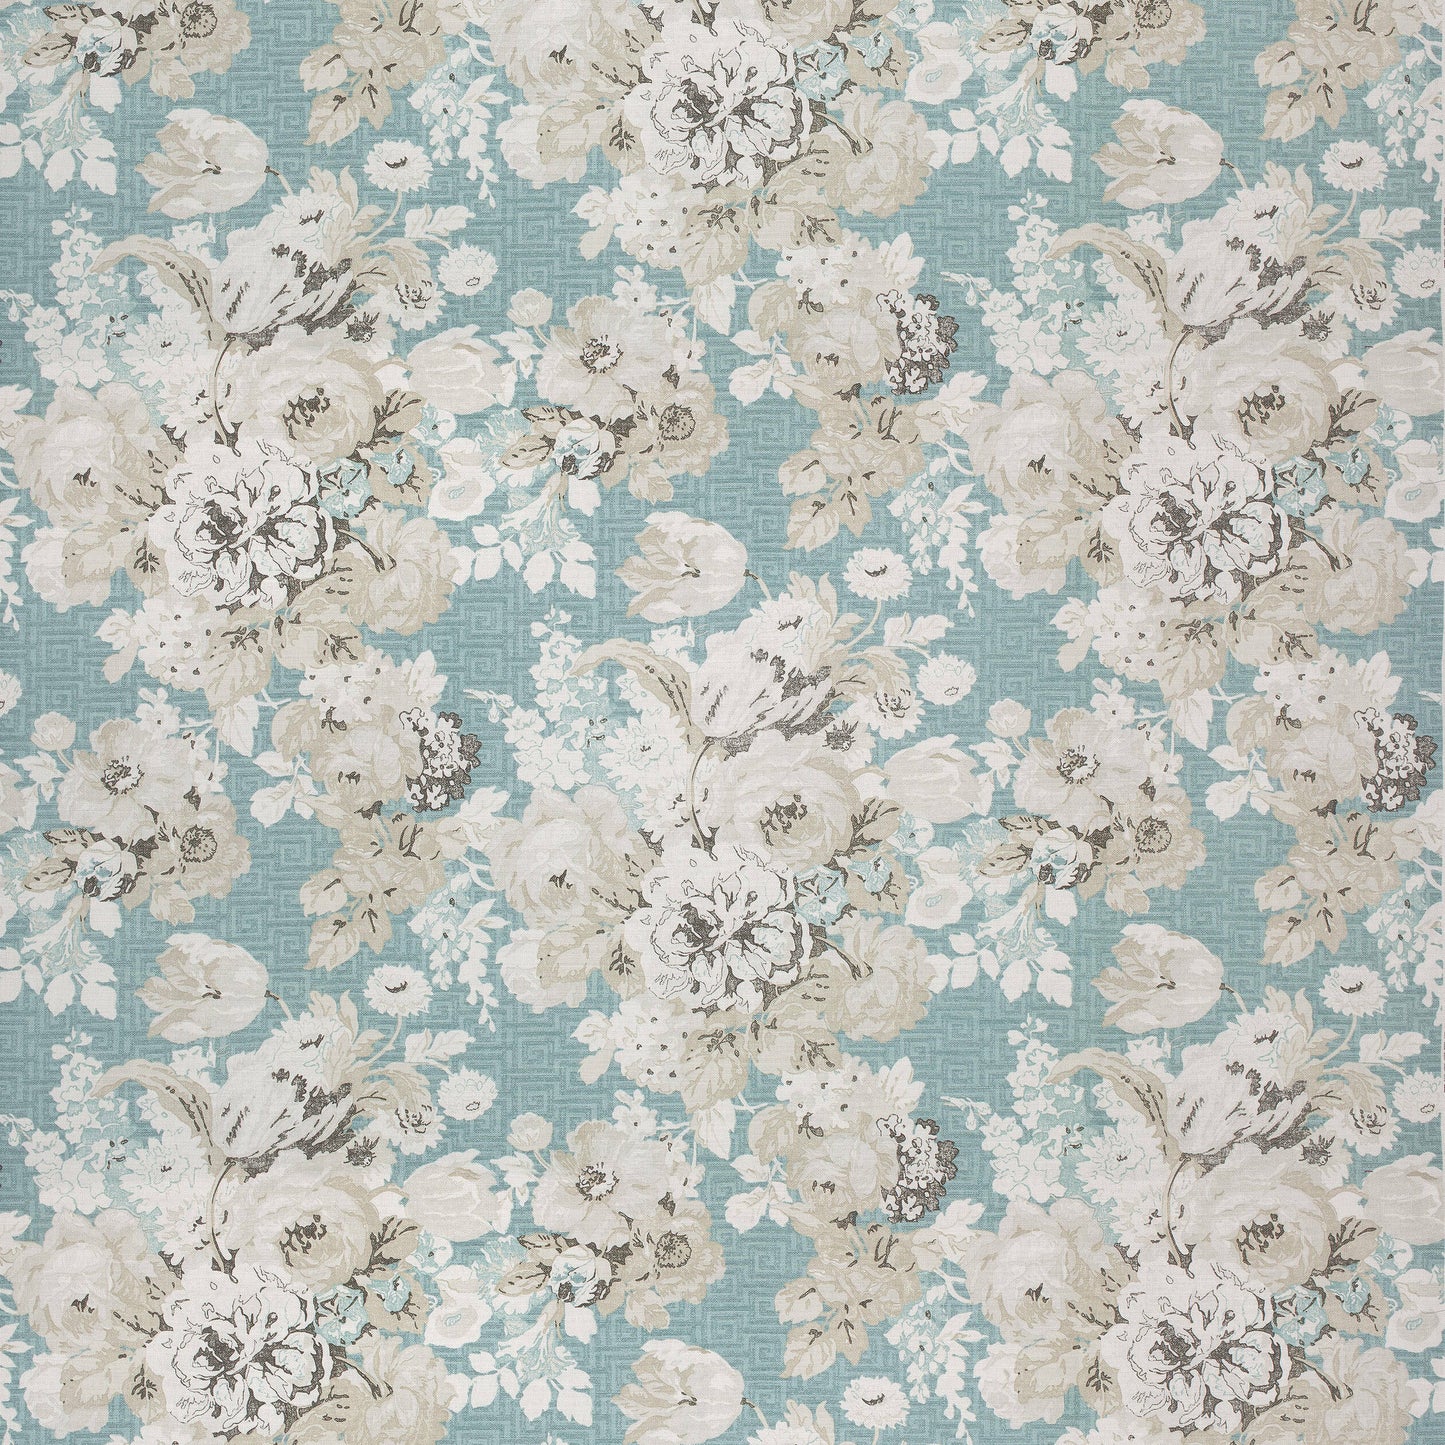 Purchase  Ann French Fabric Item# AF26134  pattern name  Wild Floral